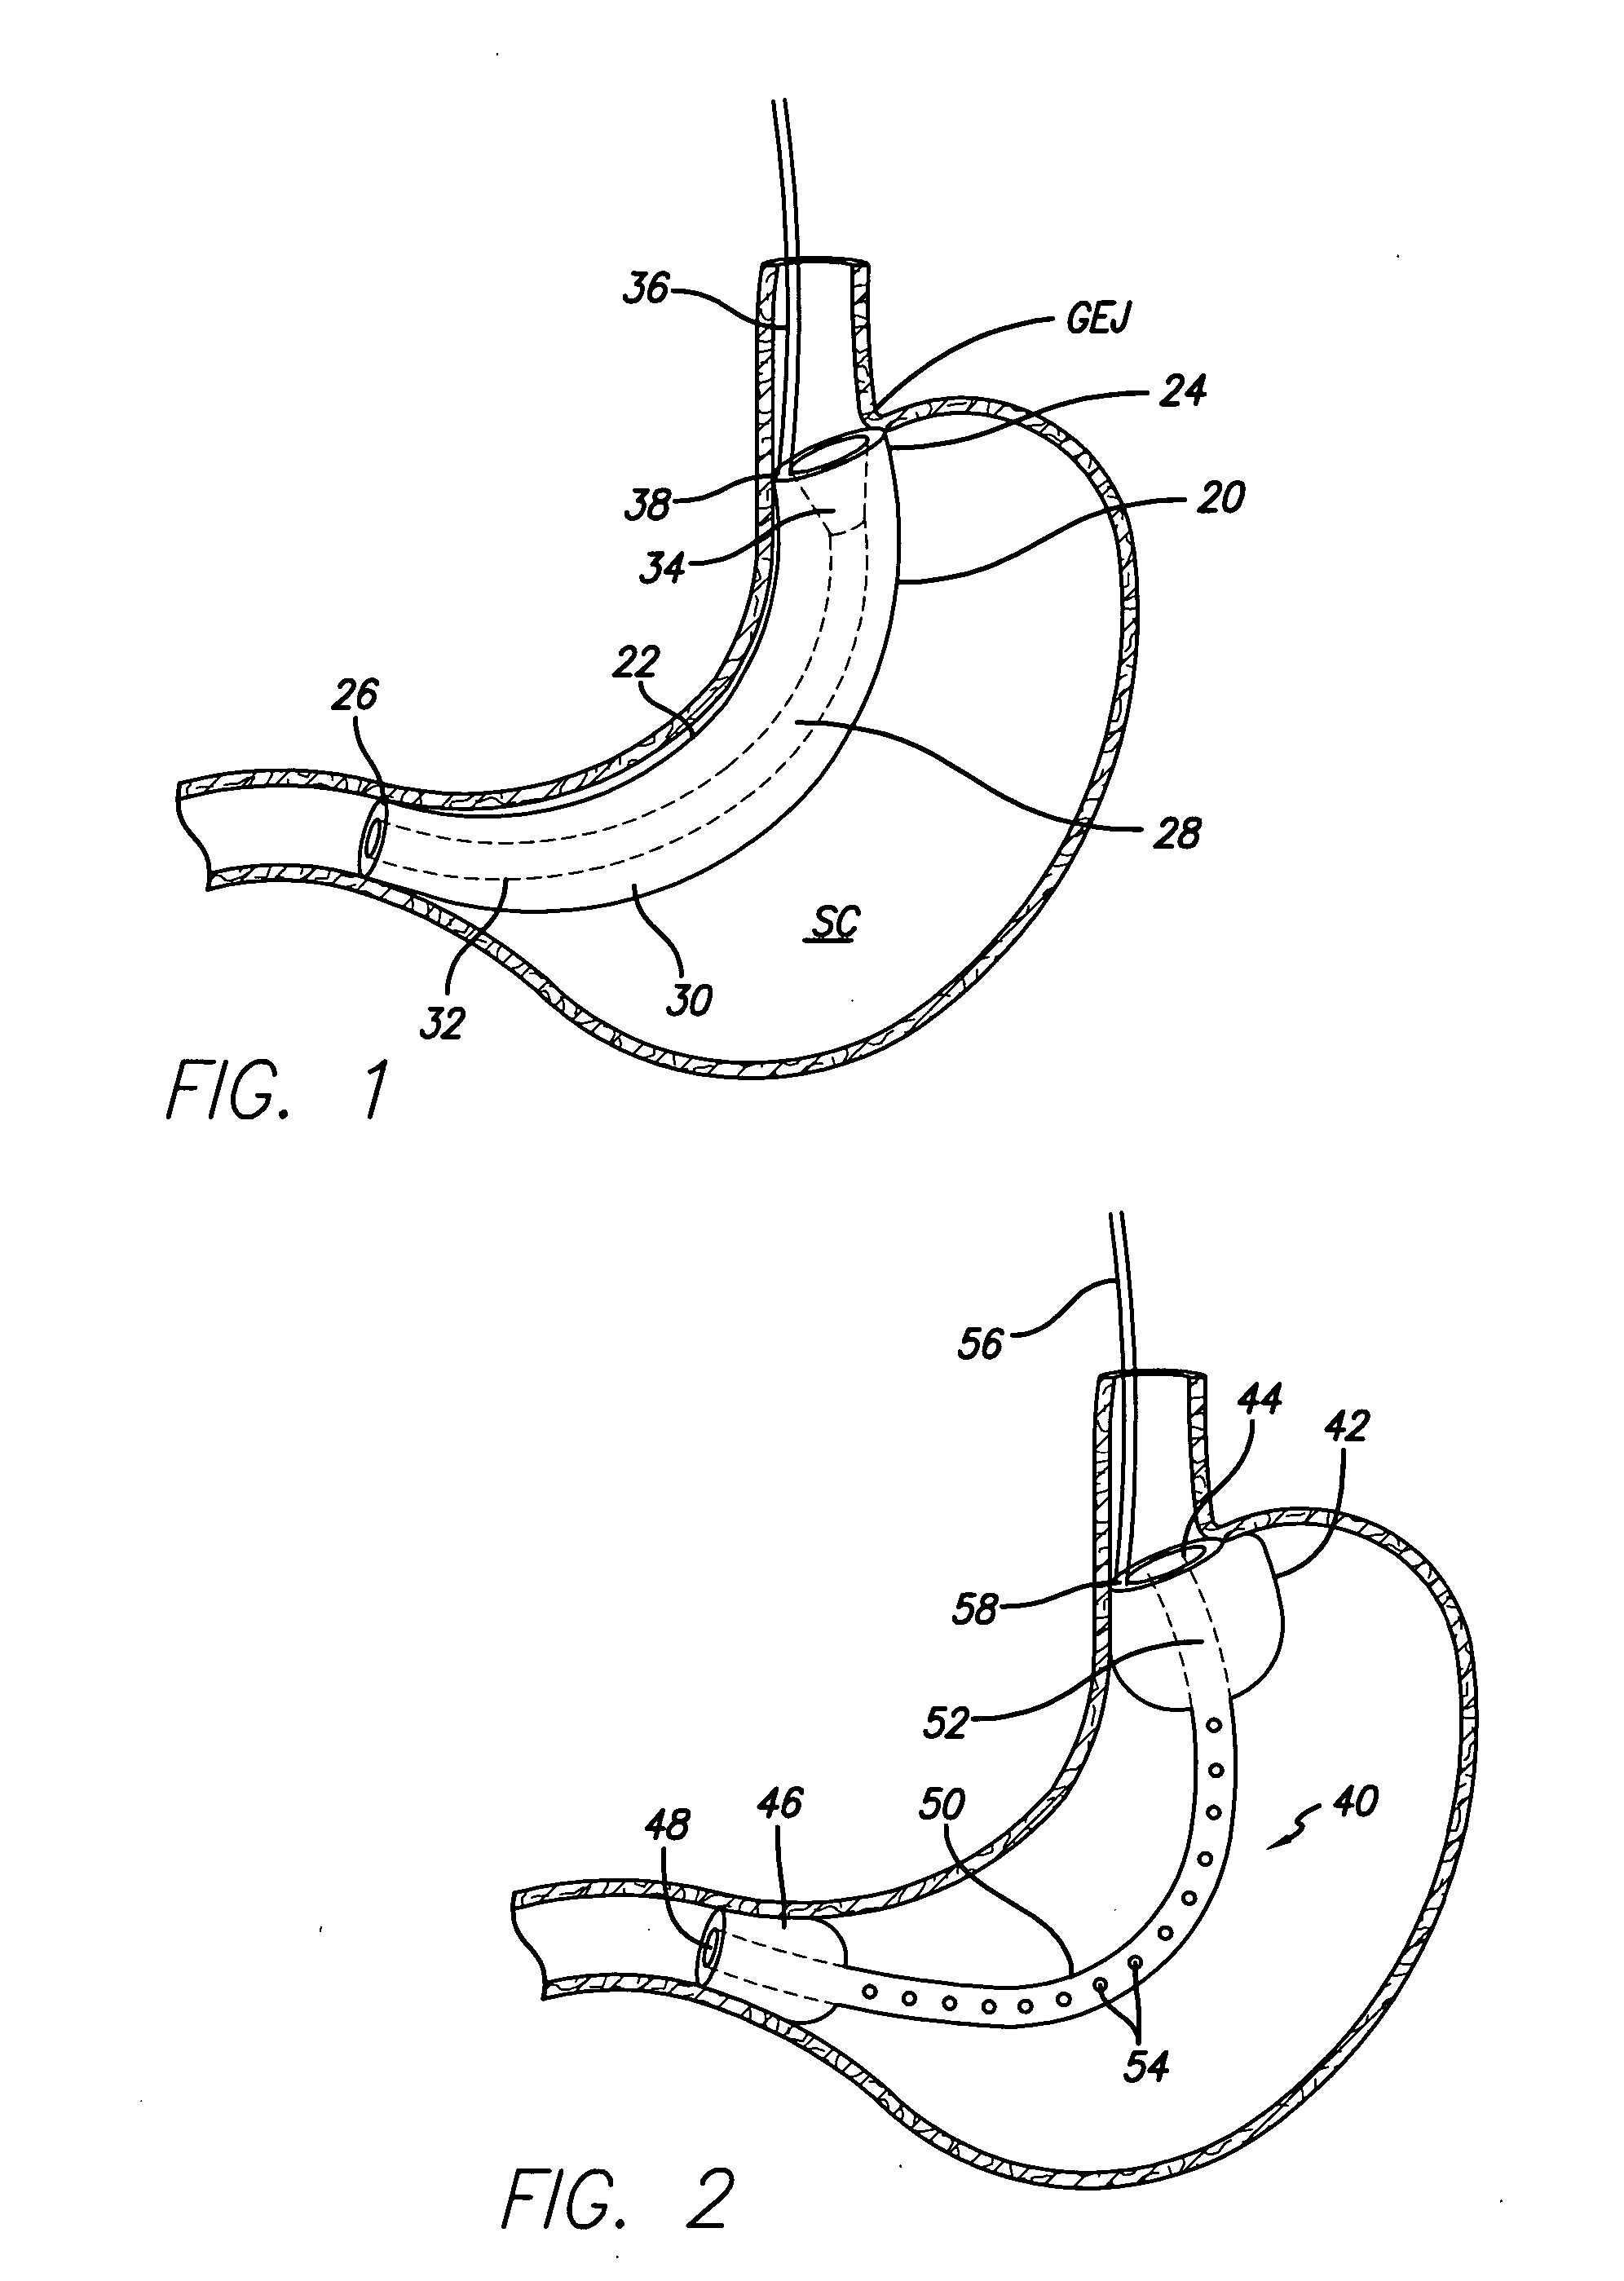 Systems and methods for treating obesity